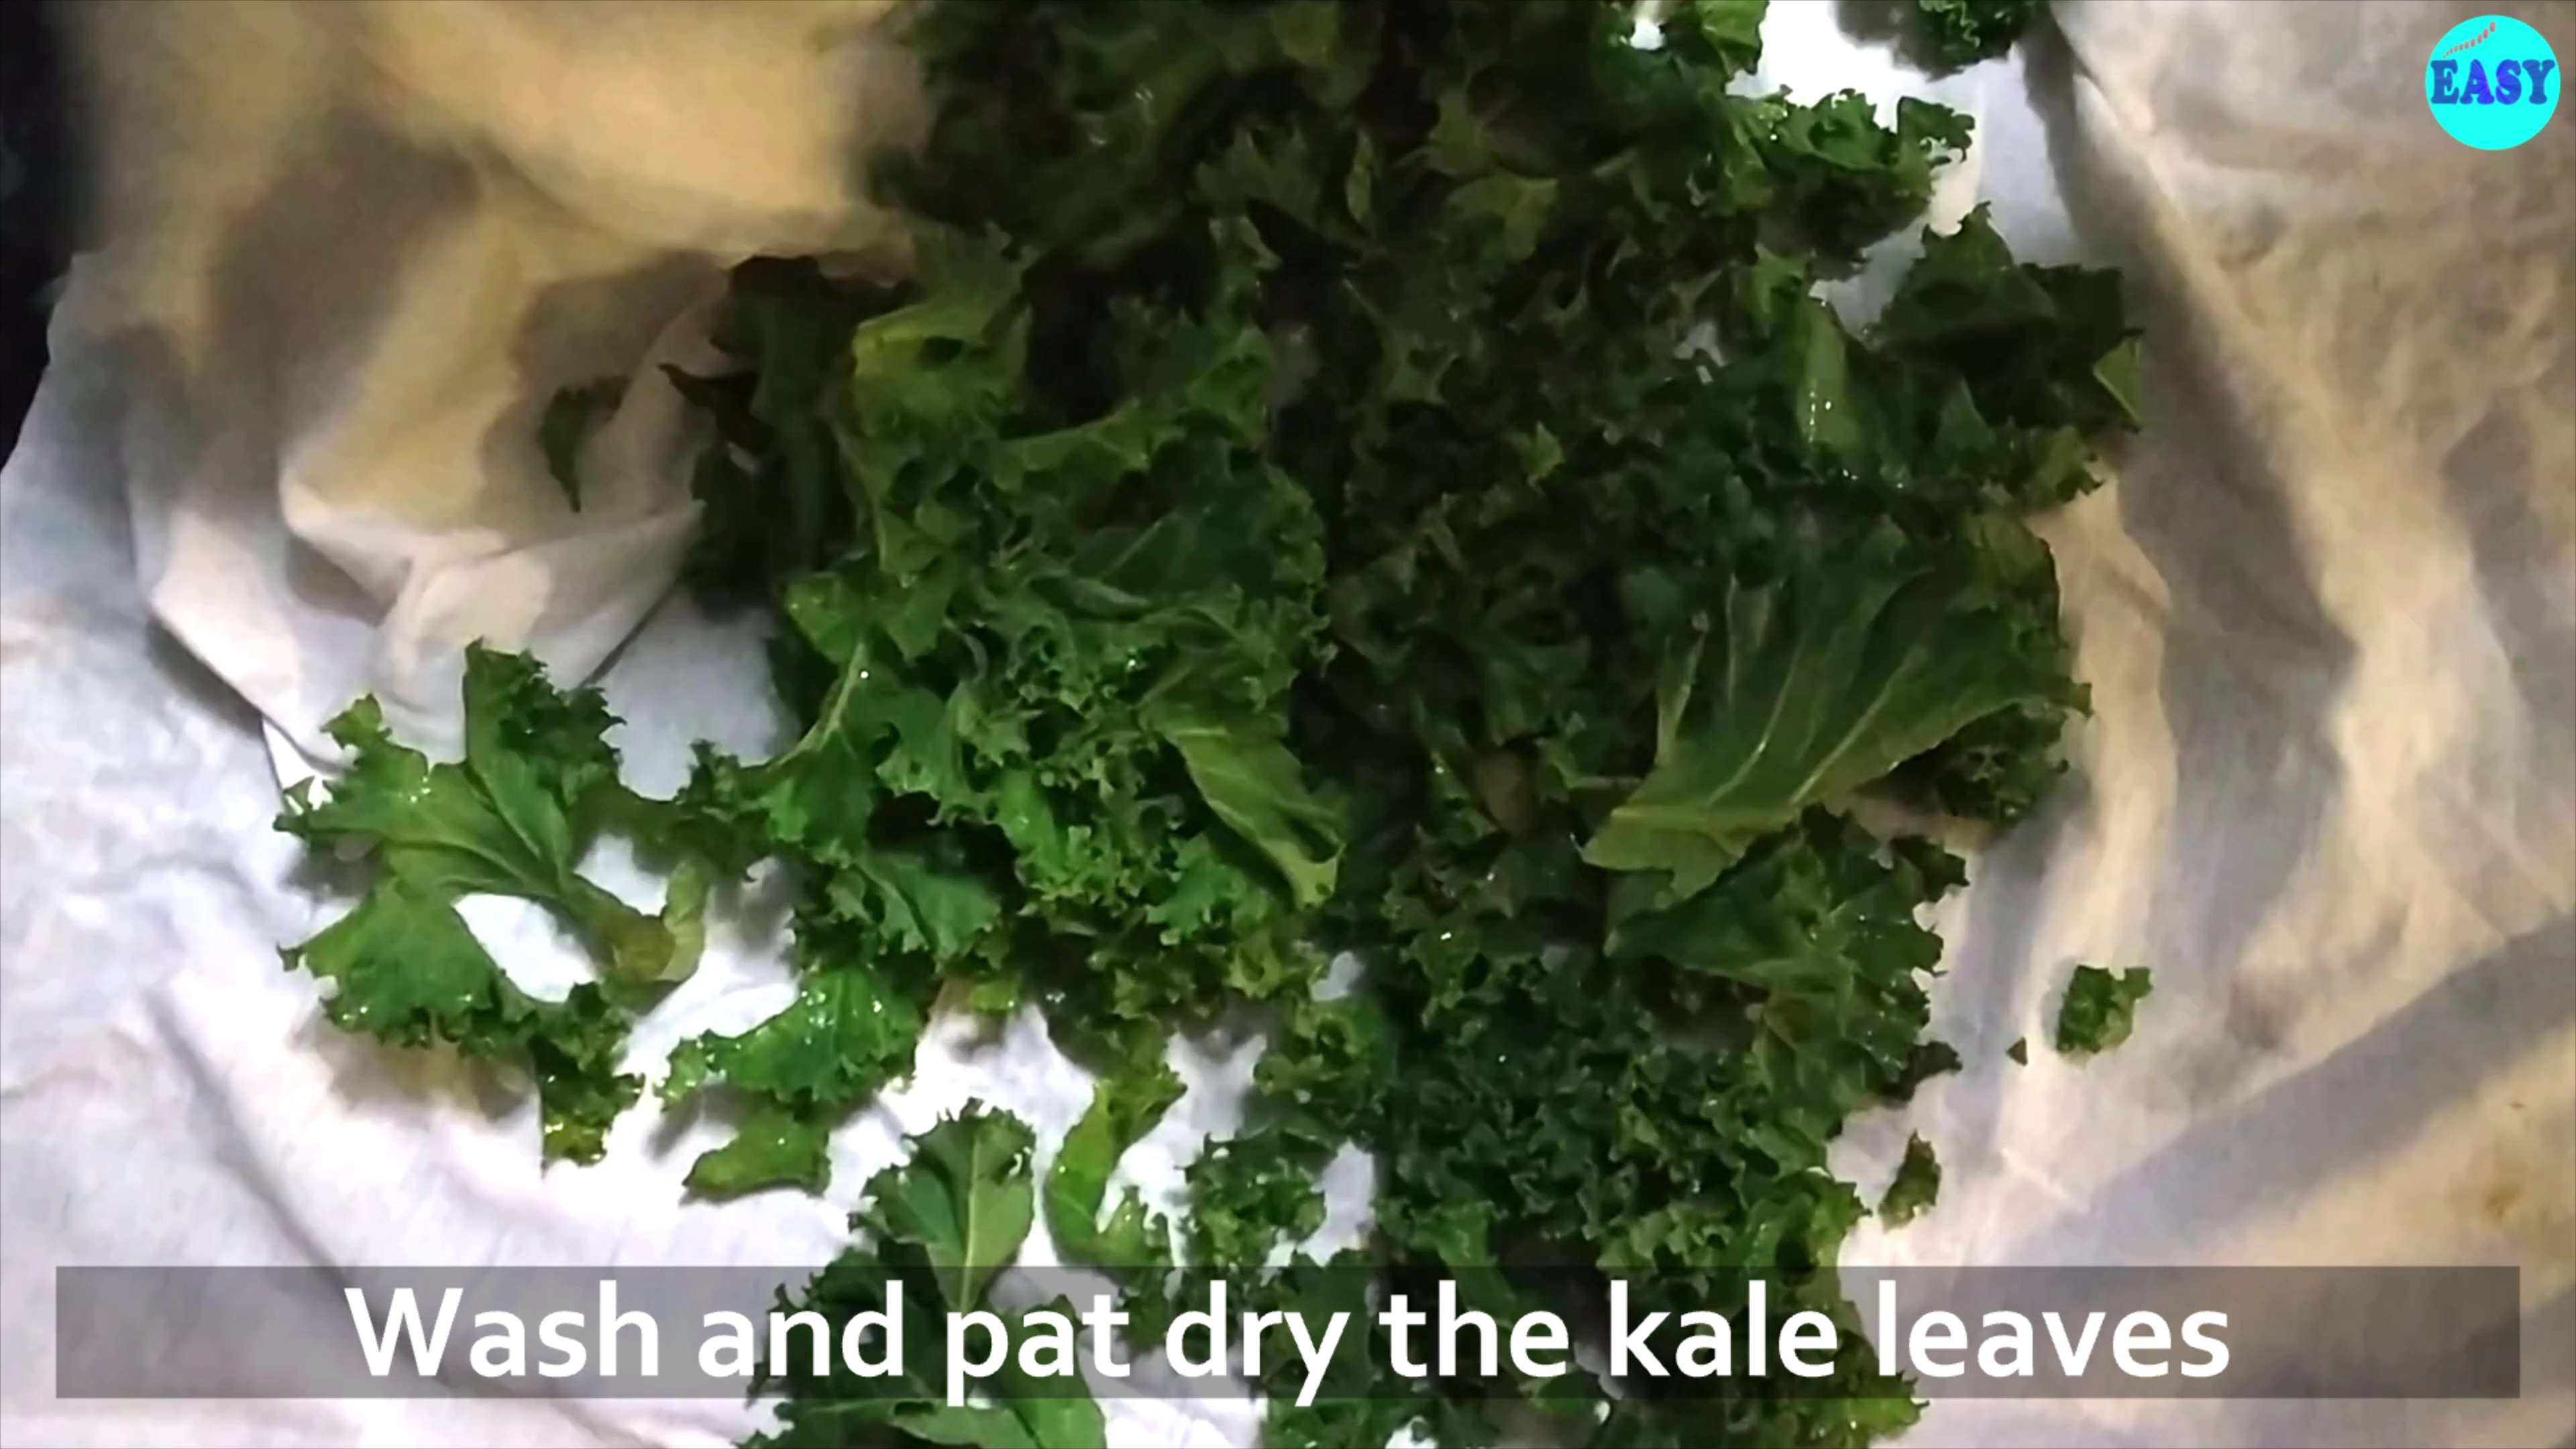 Step 1 - Wash the spinach or kale leaves thoroughly and Pat it dry.